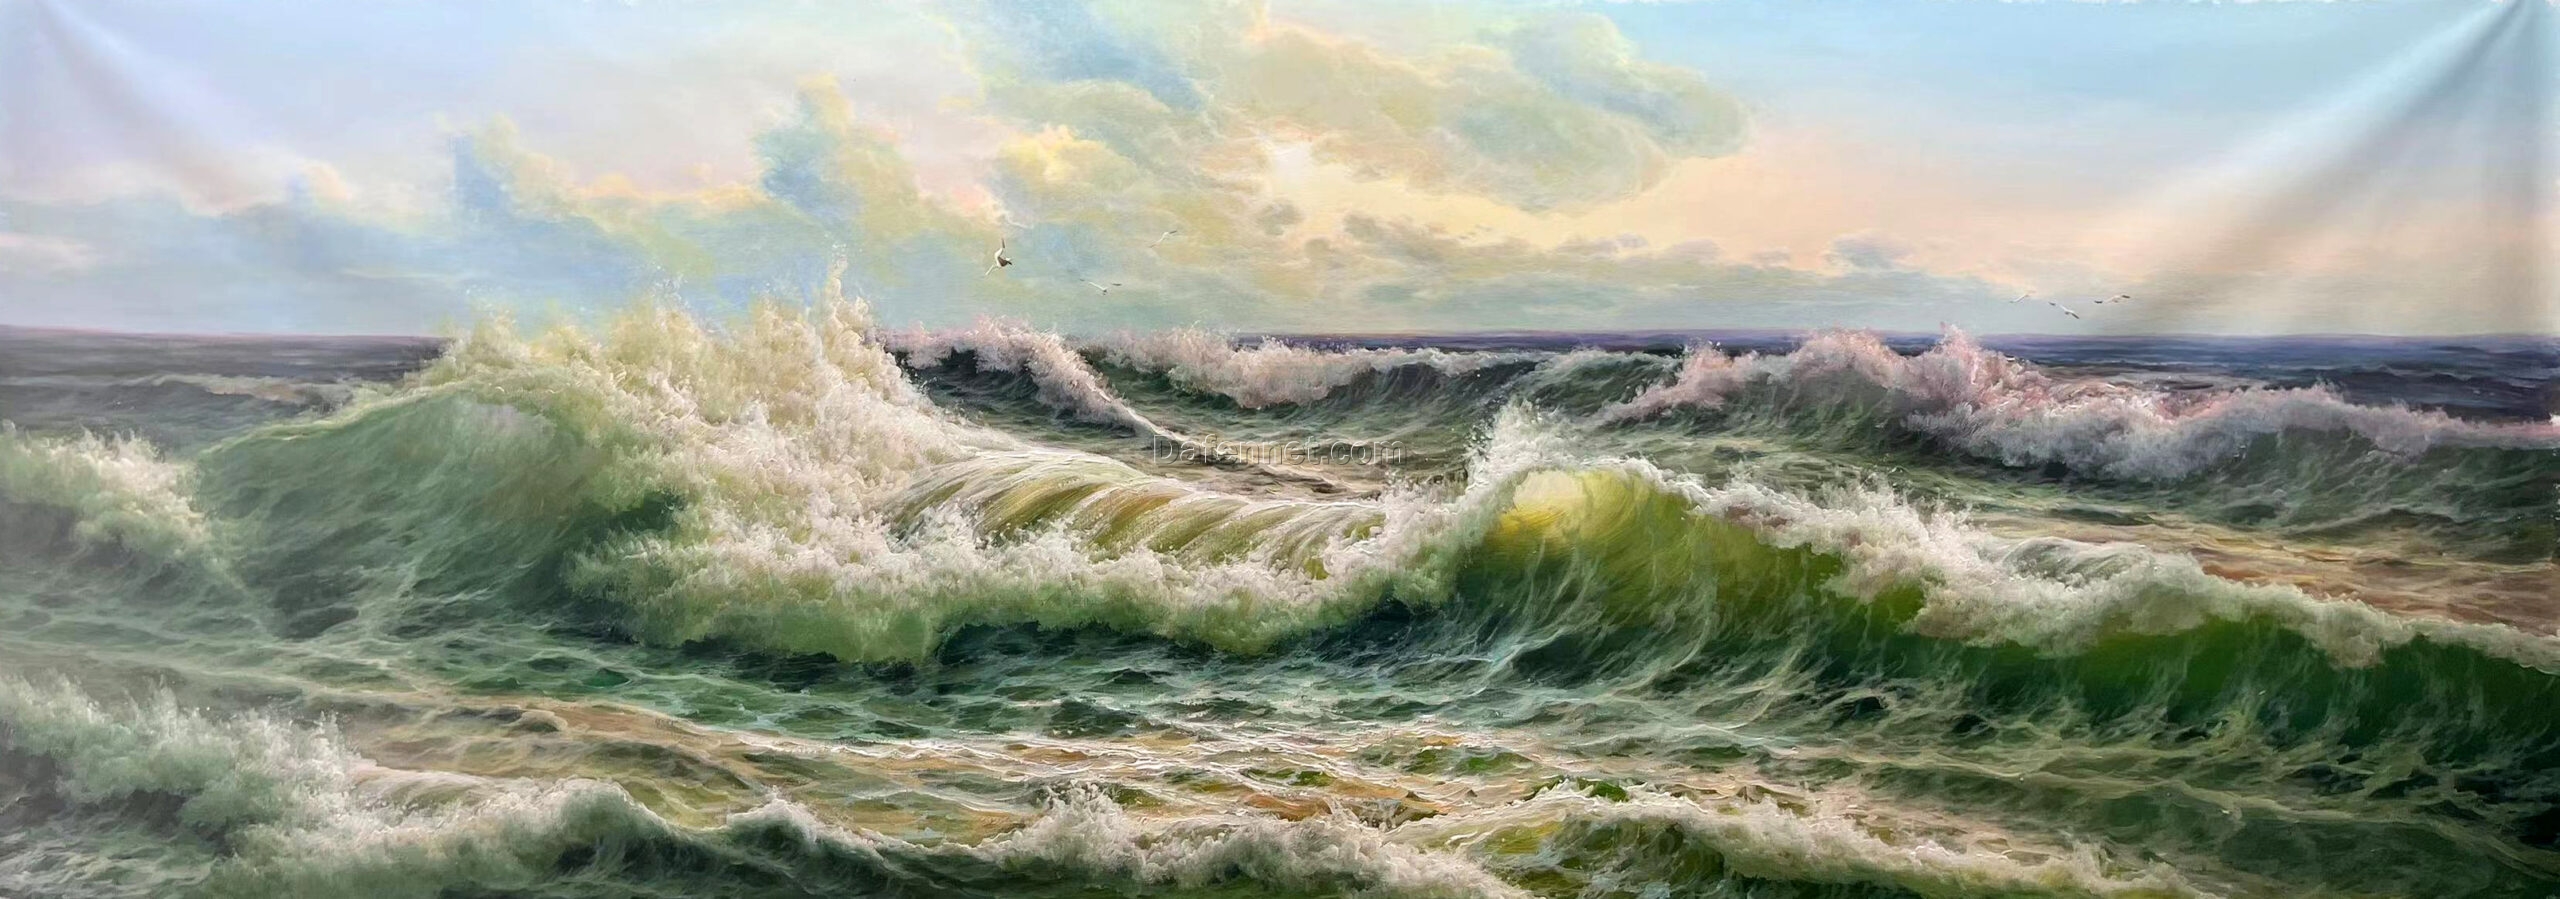 Reproduction of the sea oil painting Appreciation of works photos Dafen village oil painting